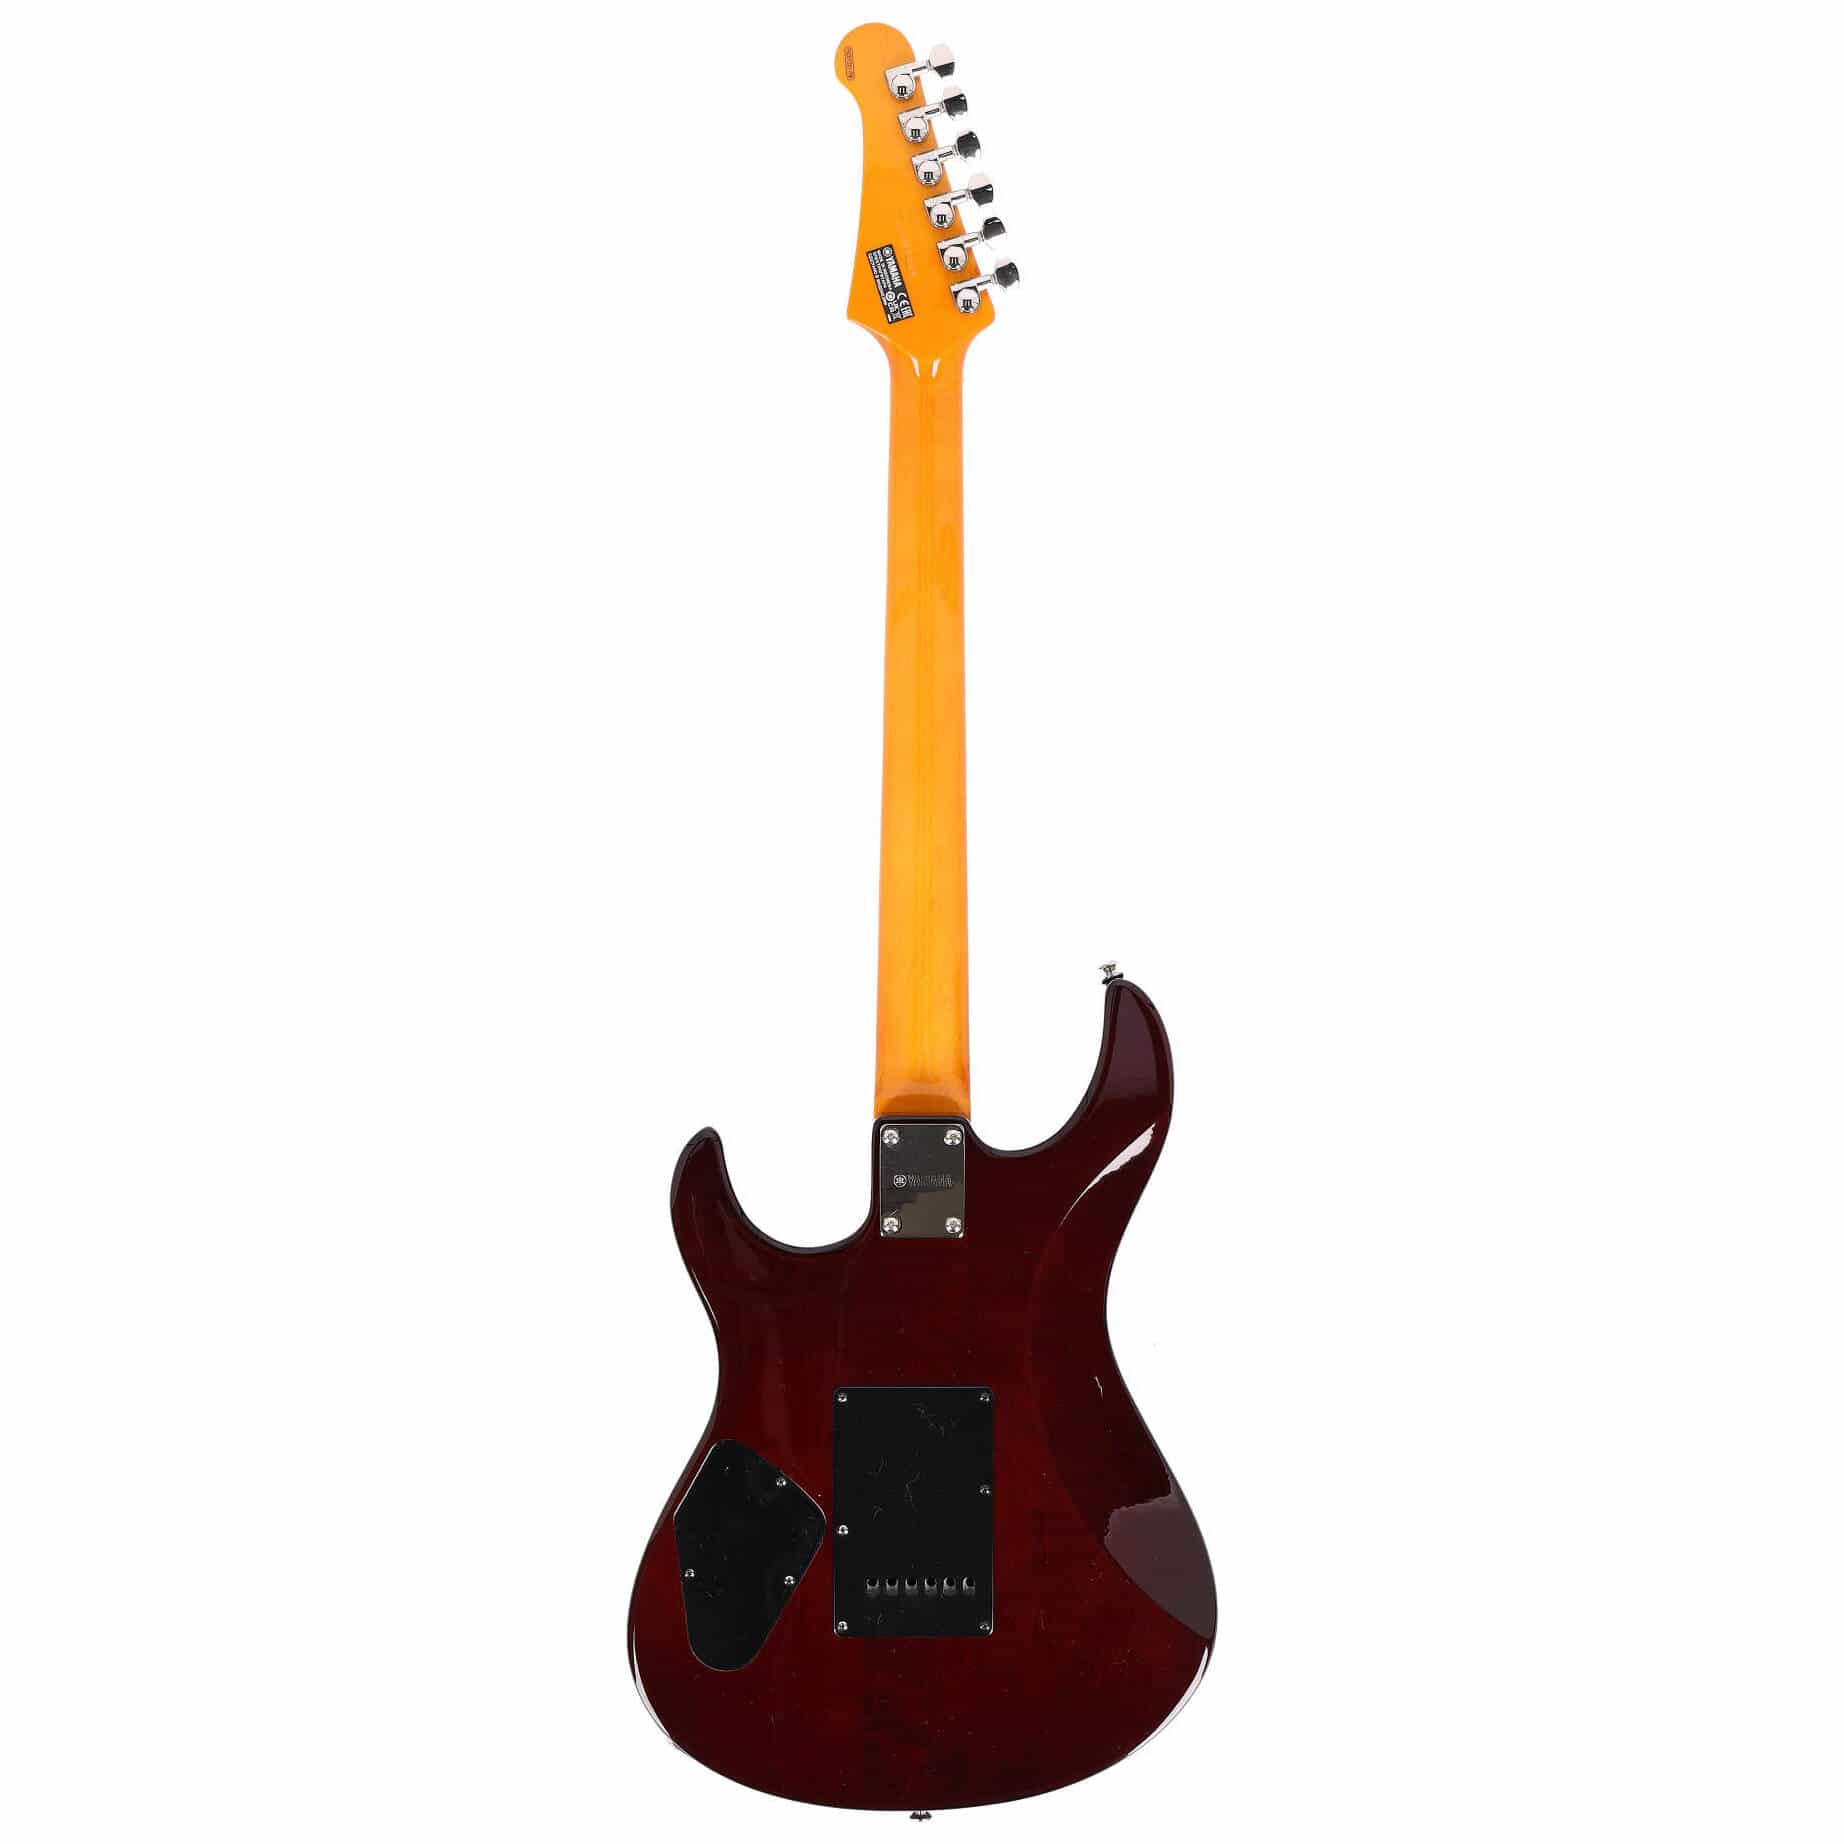 Yamaha Pacifica 612 VII FMX Root Beer 6